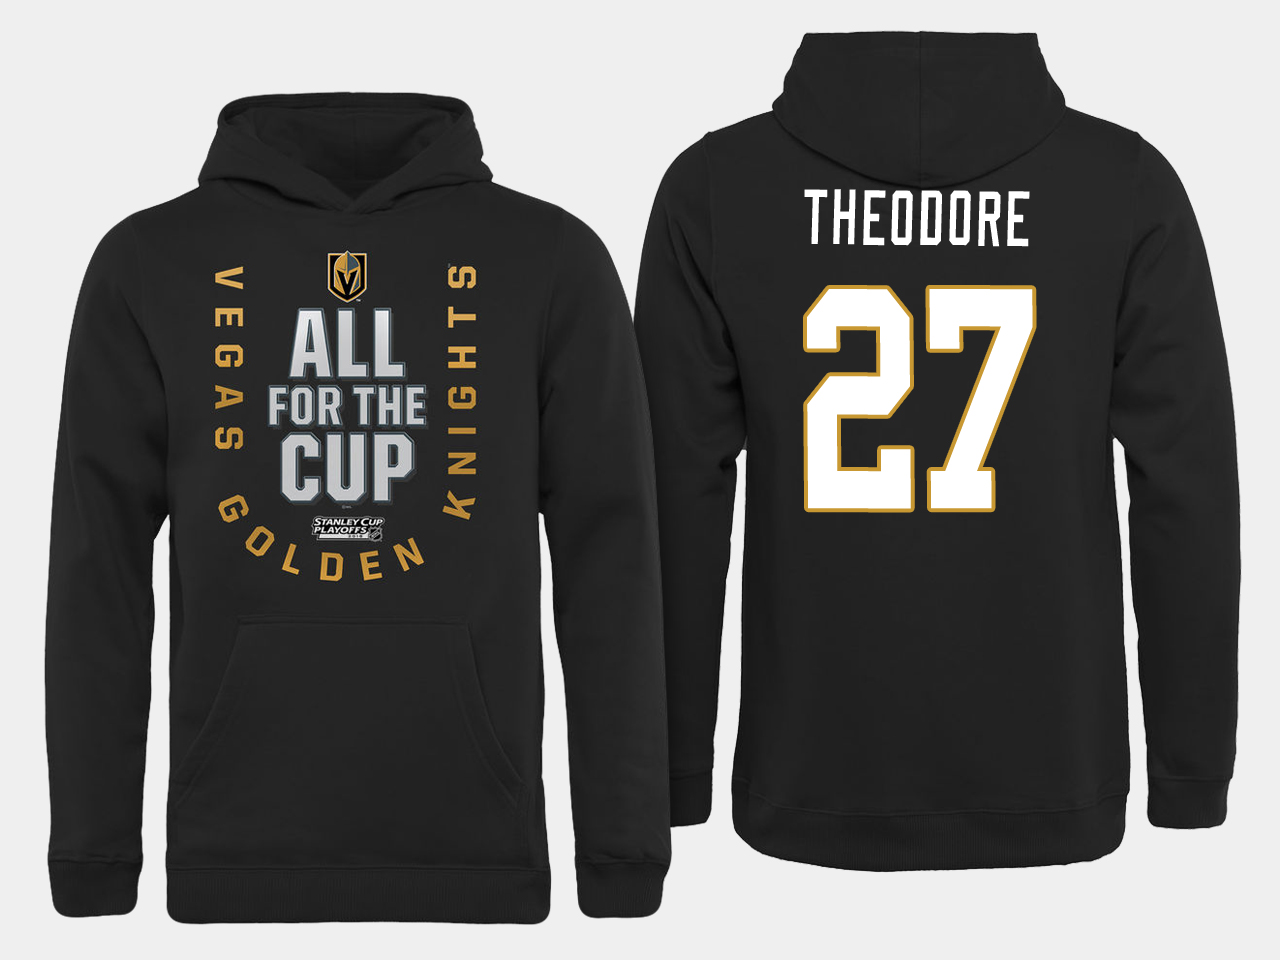 Men NHL Vegas Golden Knights #27 Theodore All for the Cup hoodie->more nhl jerseys->NHL Jersey